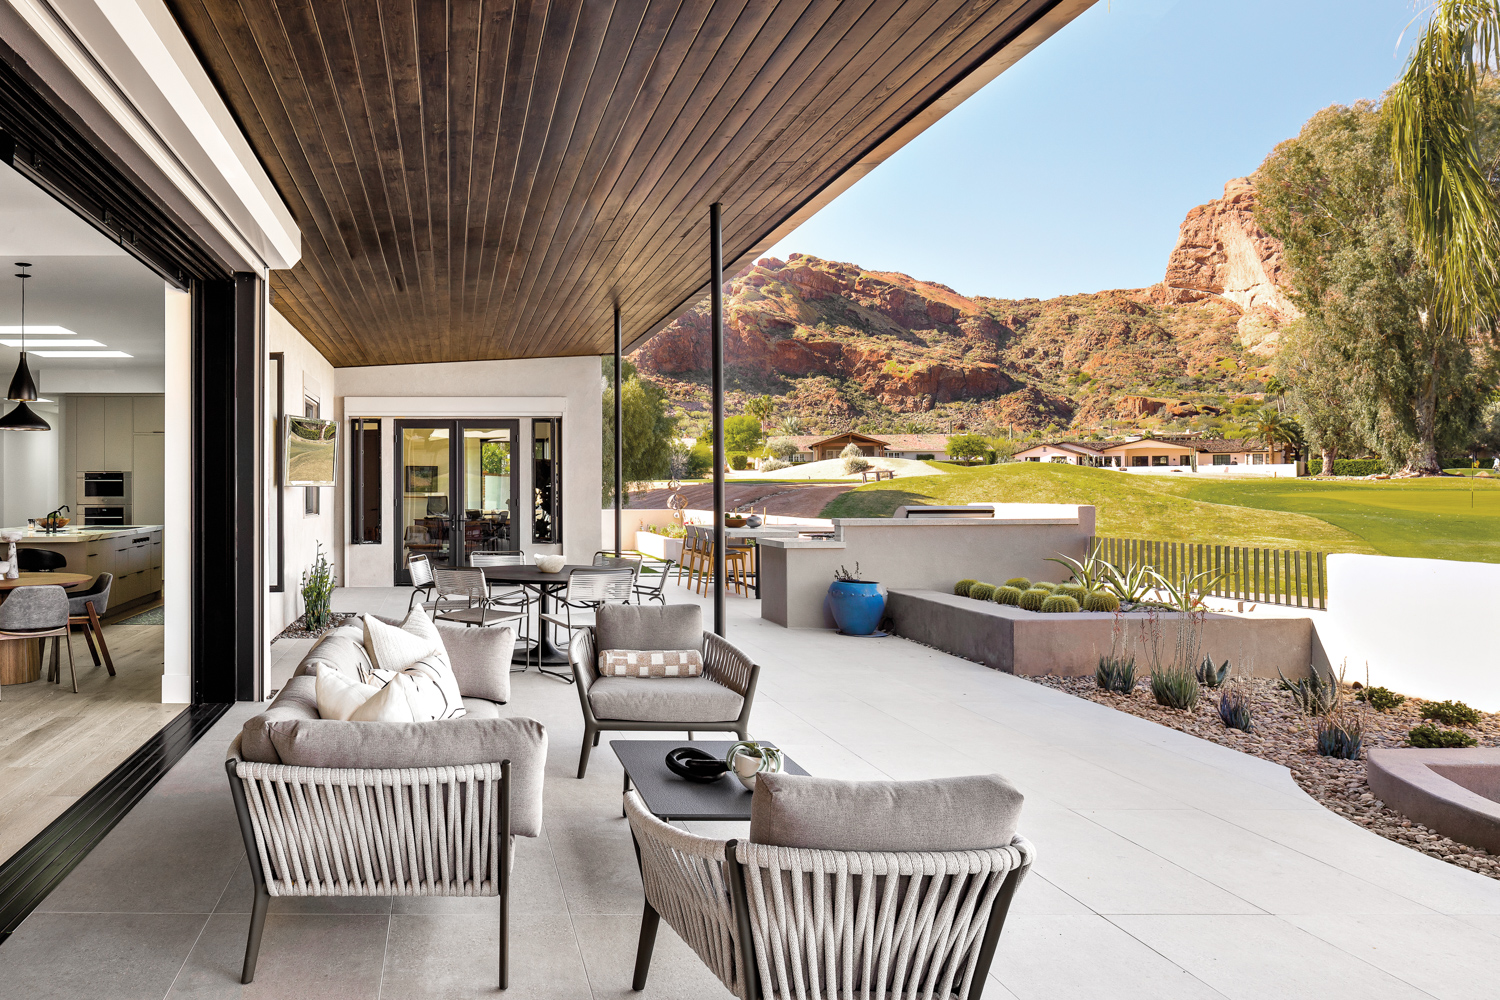 outdoor patio with dining table, sofa and lounge chairs looking out on a golf course and mountains